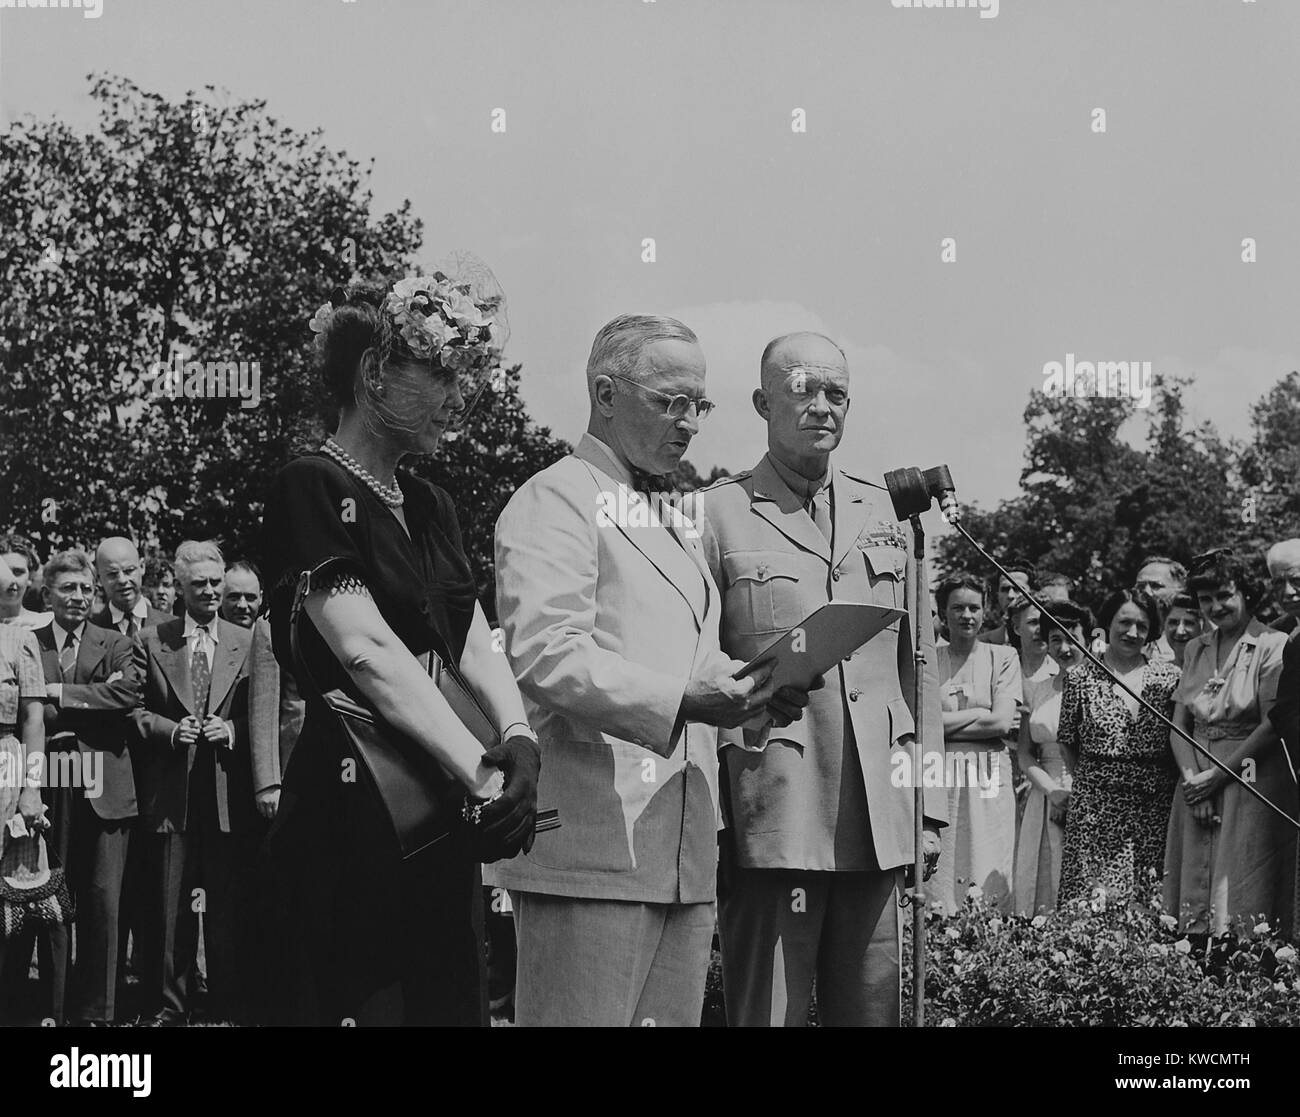 President Harry Truman honoring General Dwight Eisenhower for his World War 2 service. He was decorated with the Distinguished Service Medal for leading Allied forces in Europe during WW2. Future First Lady Mamie Eisenhower is at left. Washington D.C., June 18, 1945 - (BSLOC 2014 15 27) Stock Photo